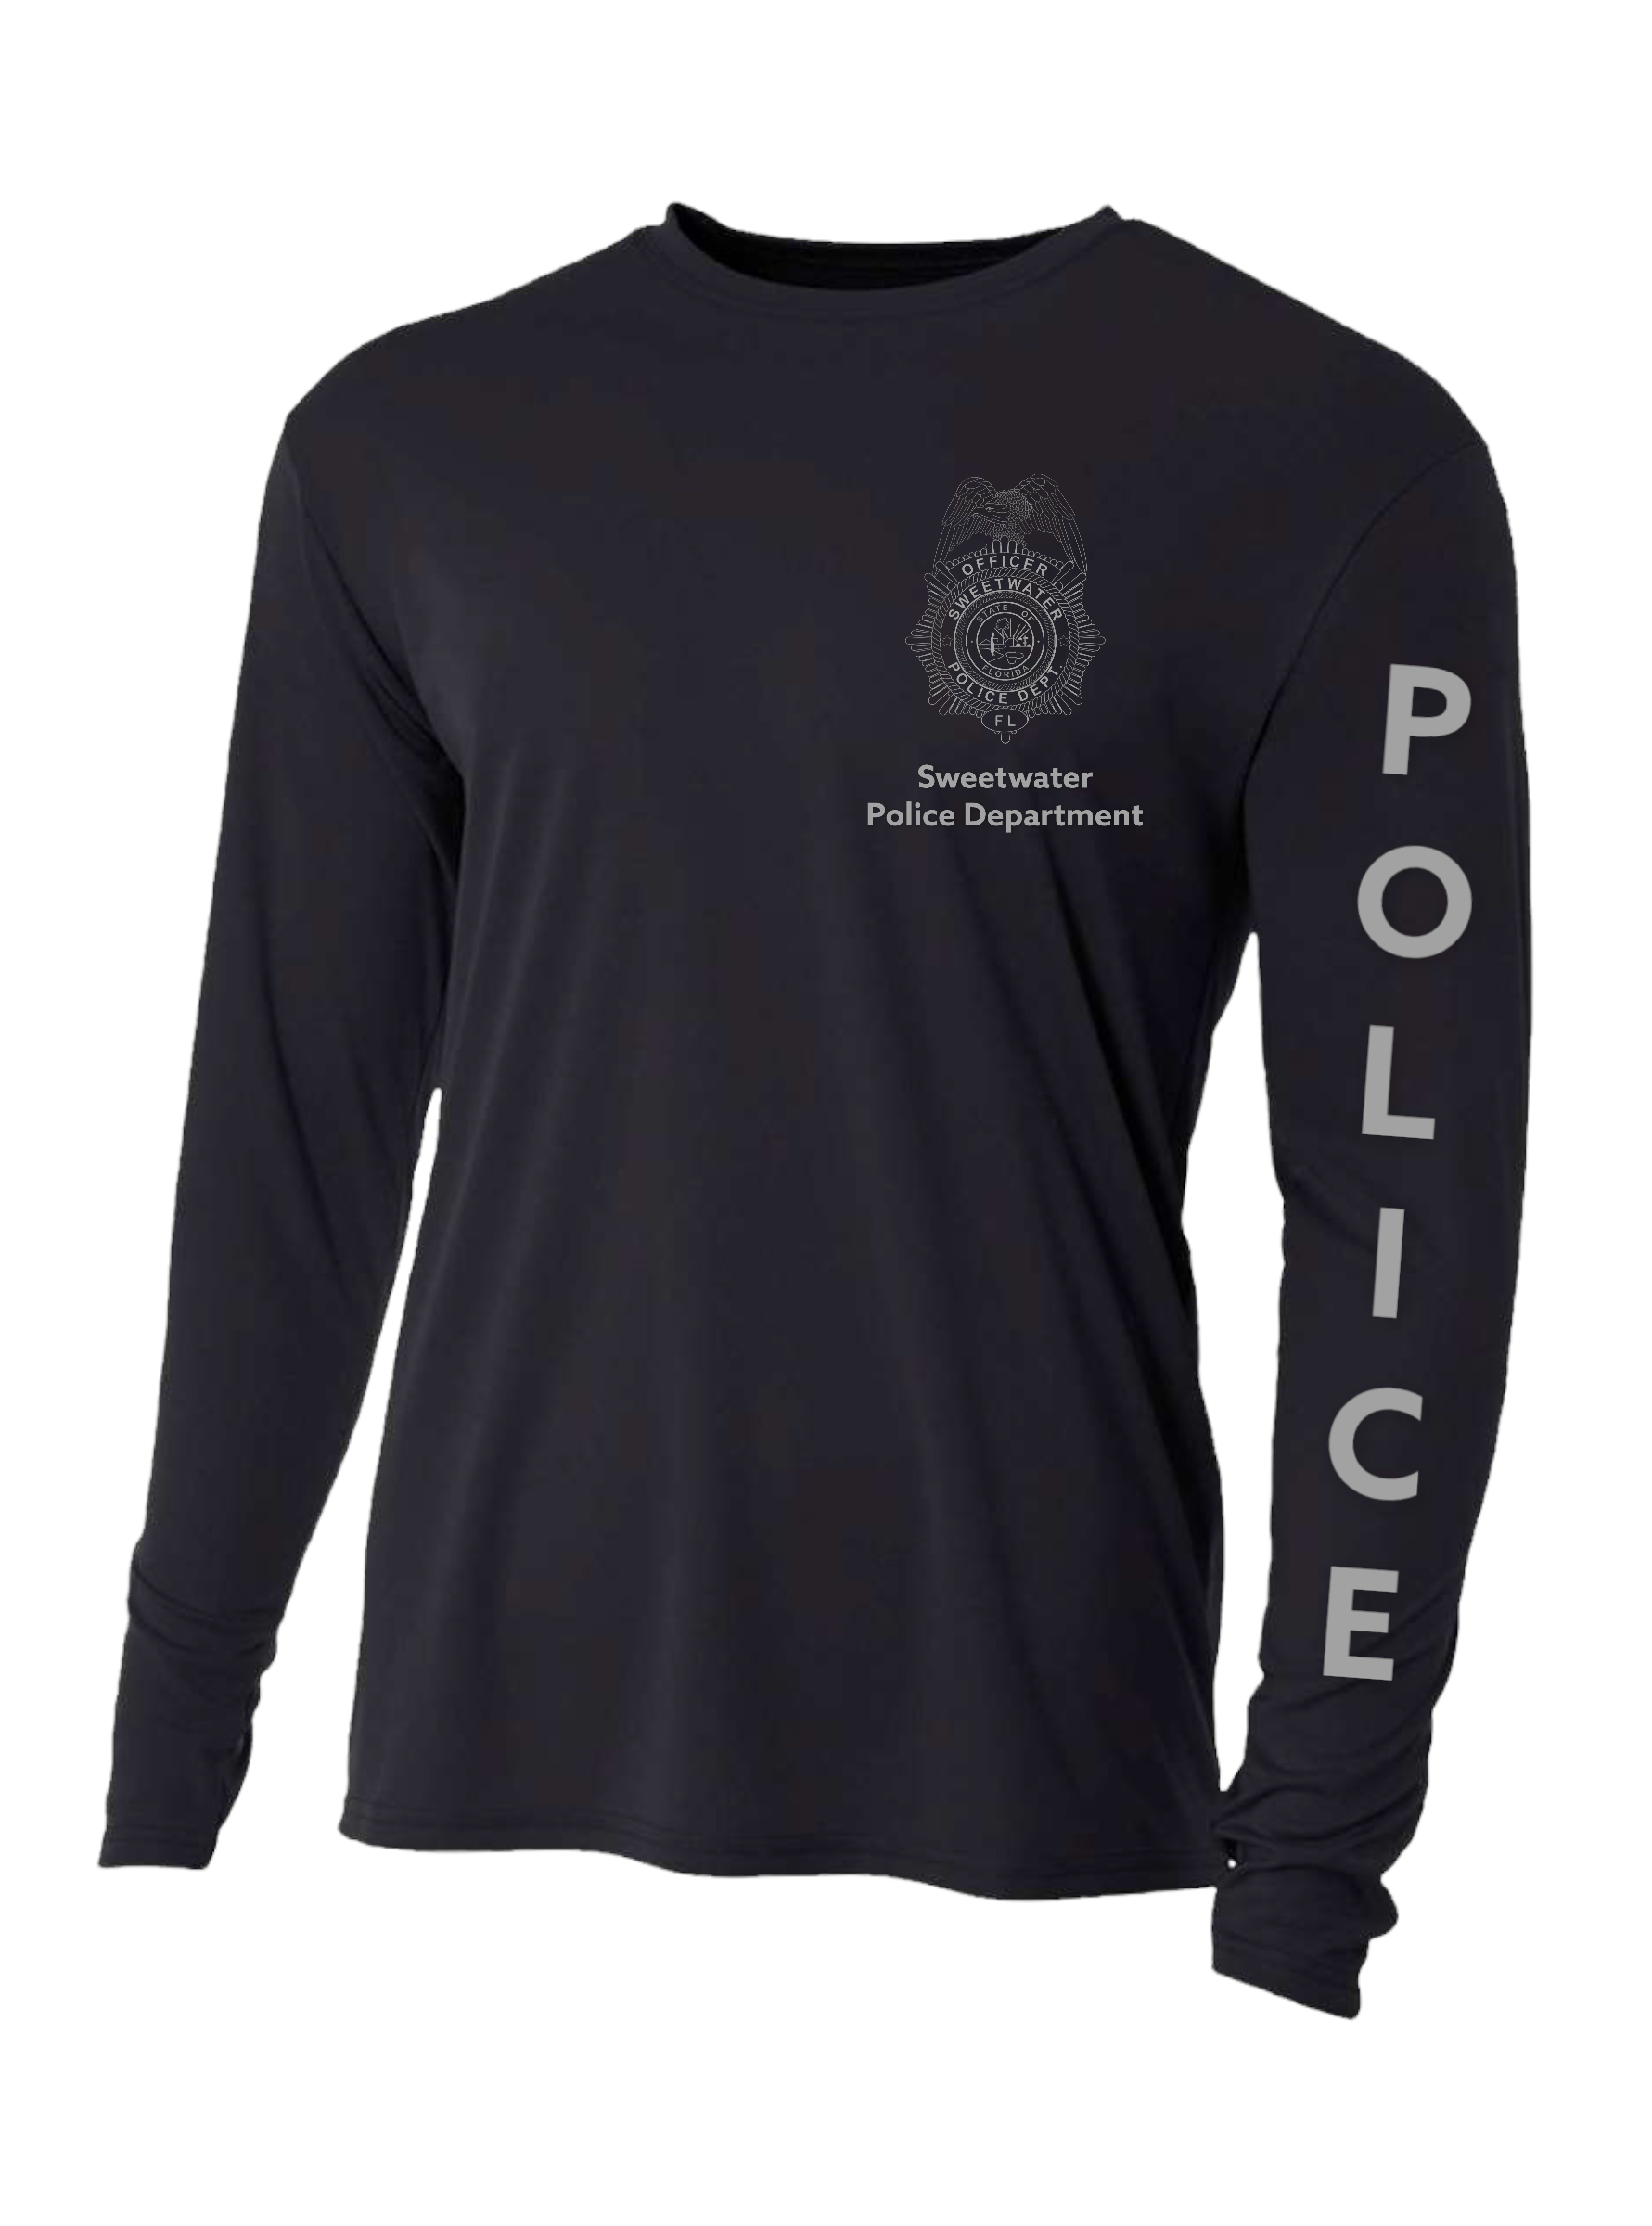 Sweetwater Police Department Cooling Performance Longsleeve